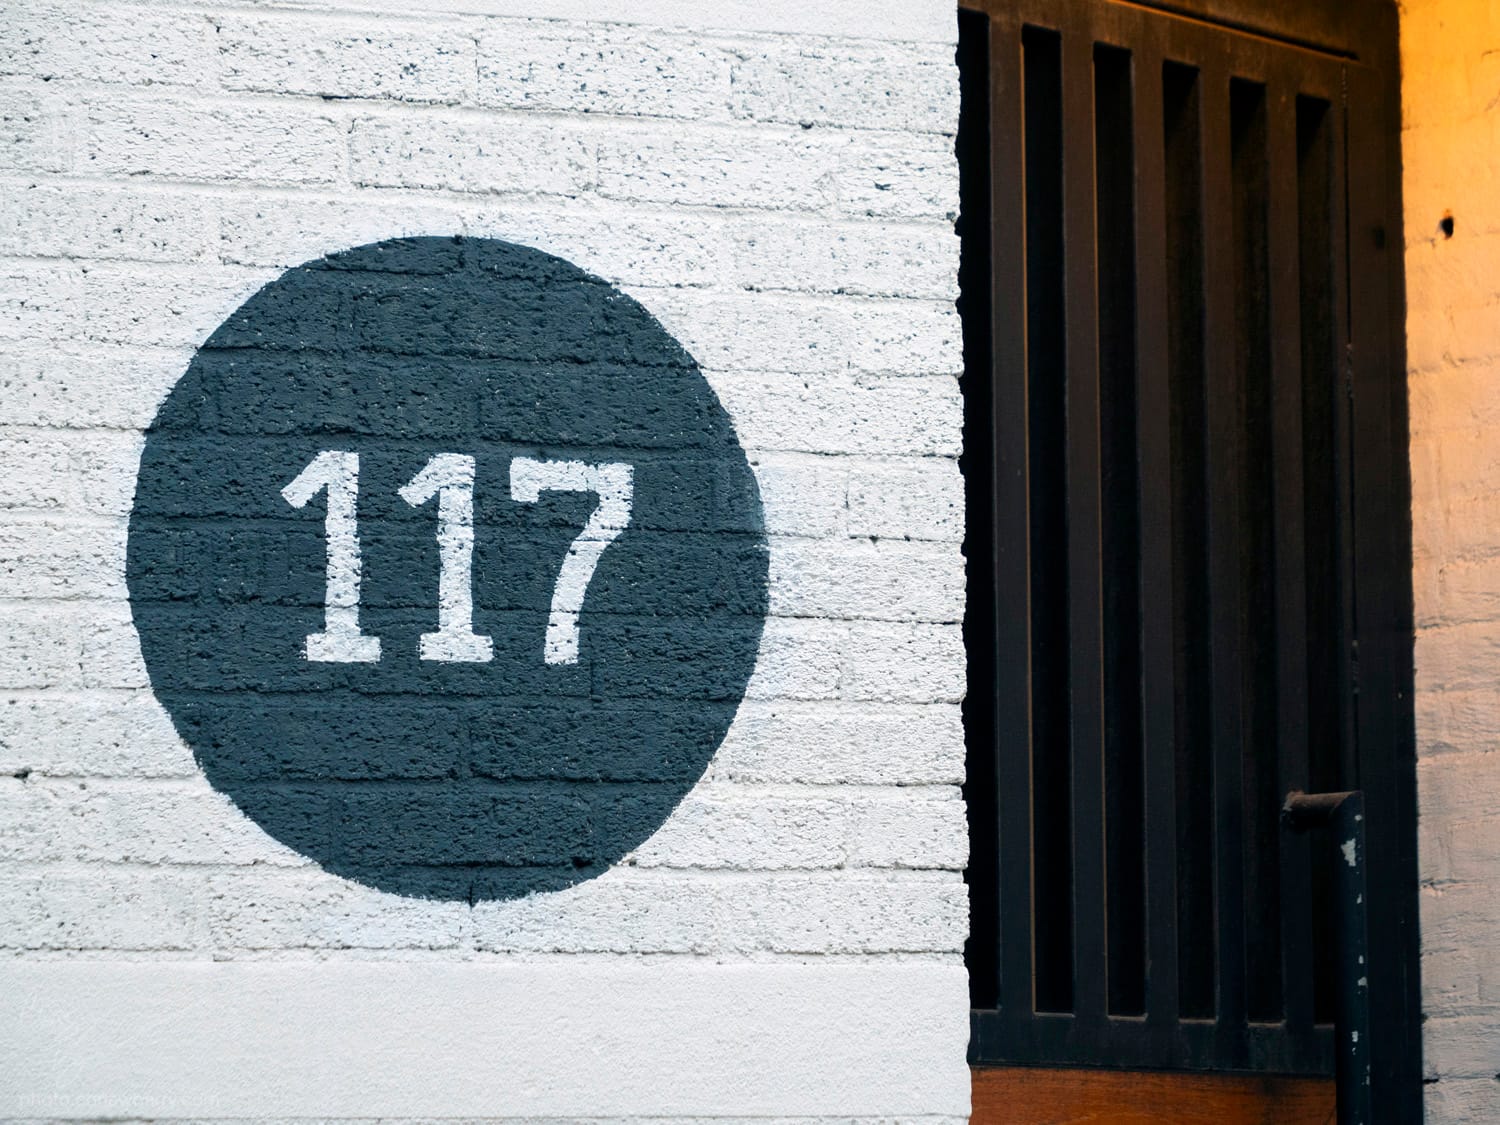 A white brick wall with a large black circle painted on it. In the middle of the circle are the numerals 117